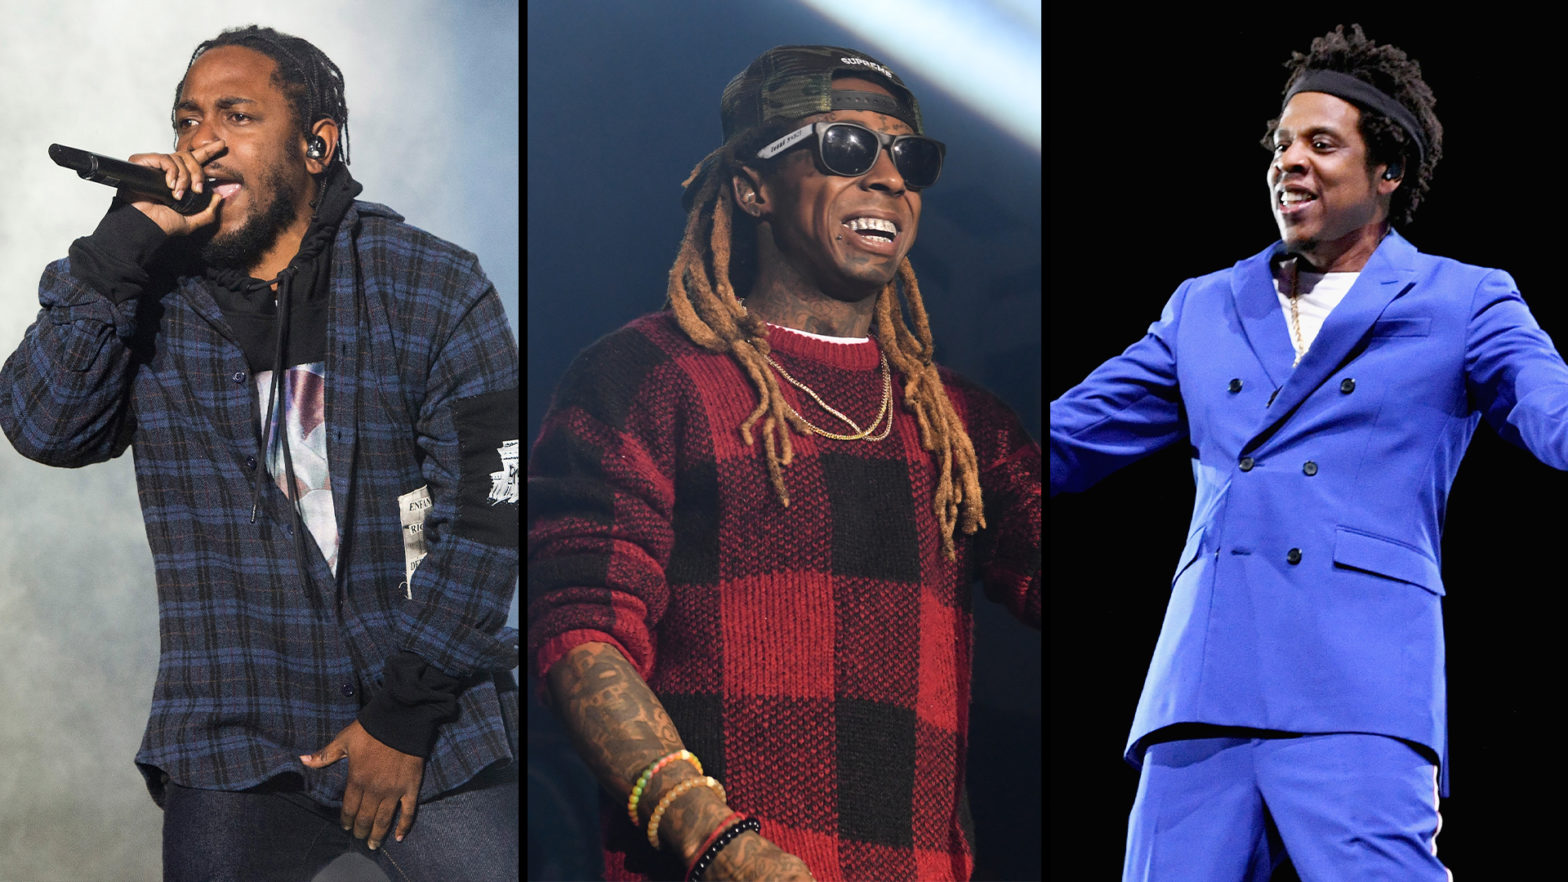 Here Are Some Of The Highest Grossing Hip-Hop Tours Of All Time